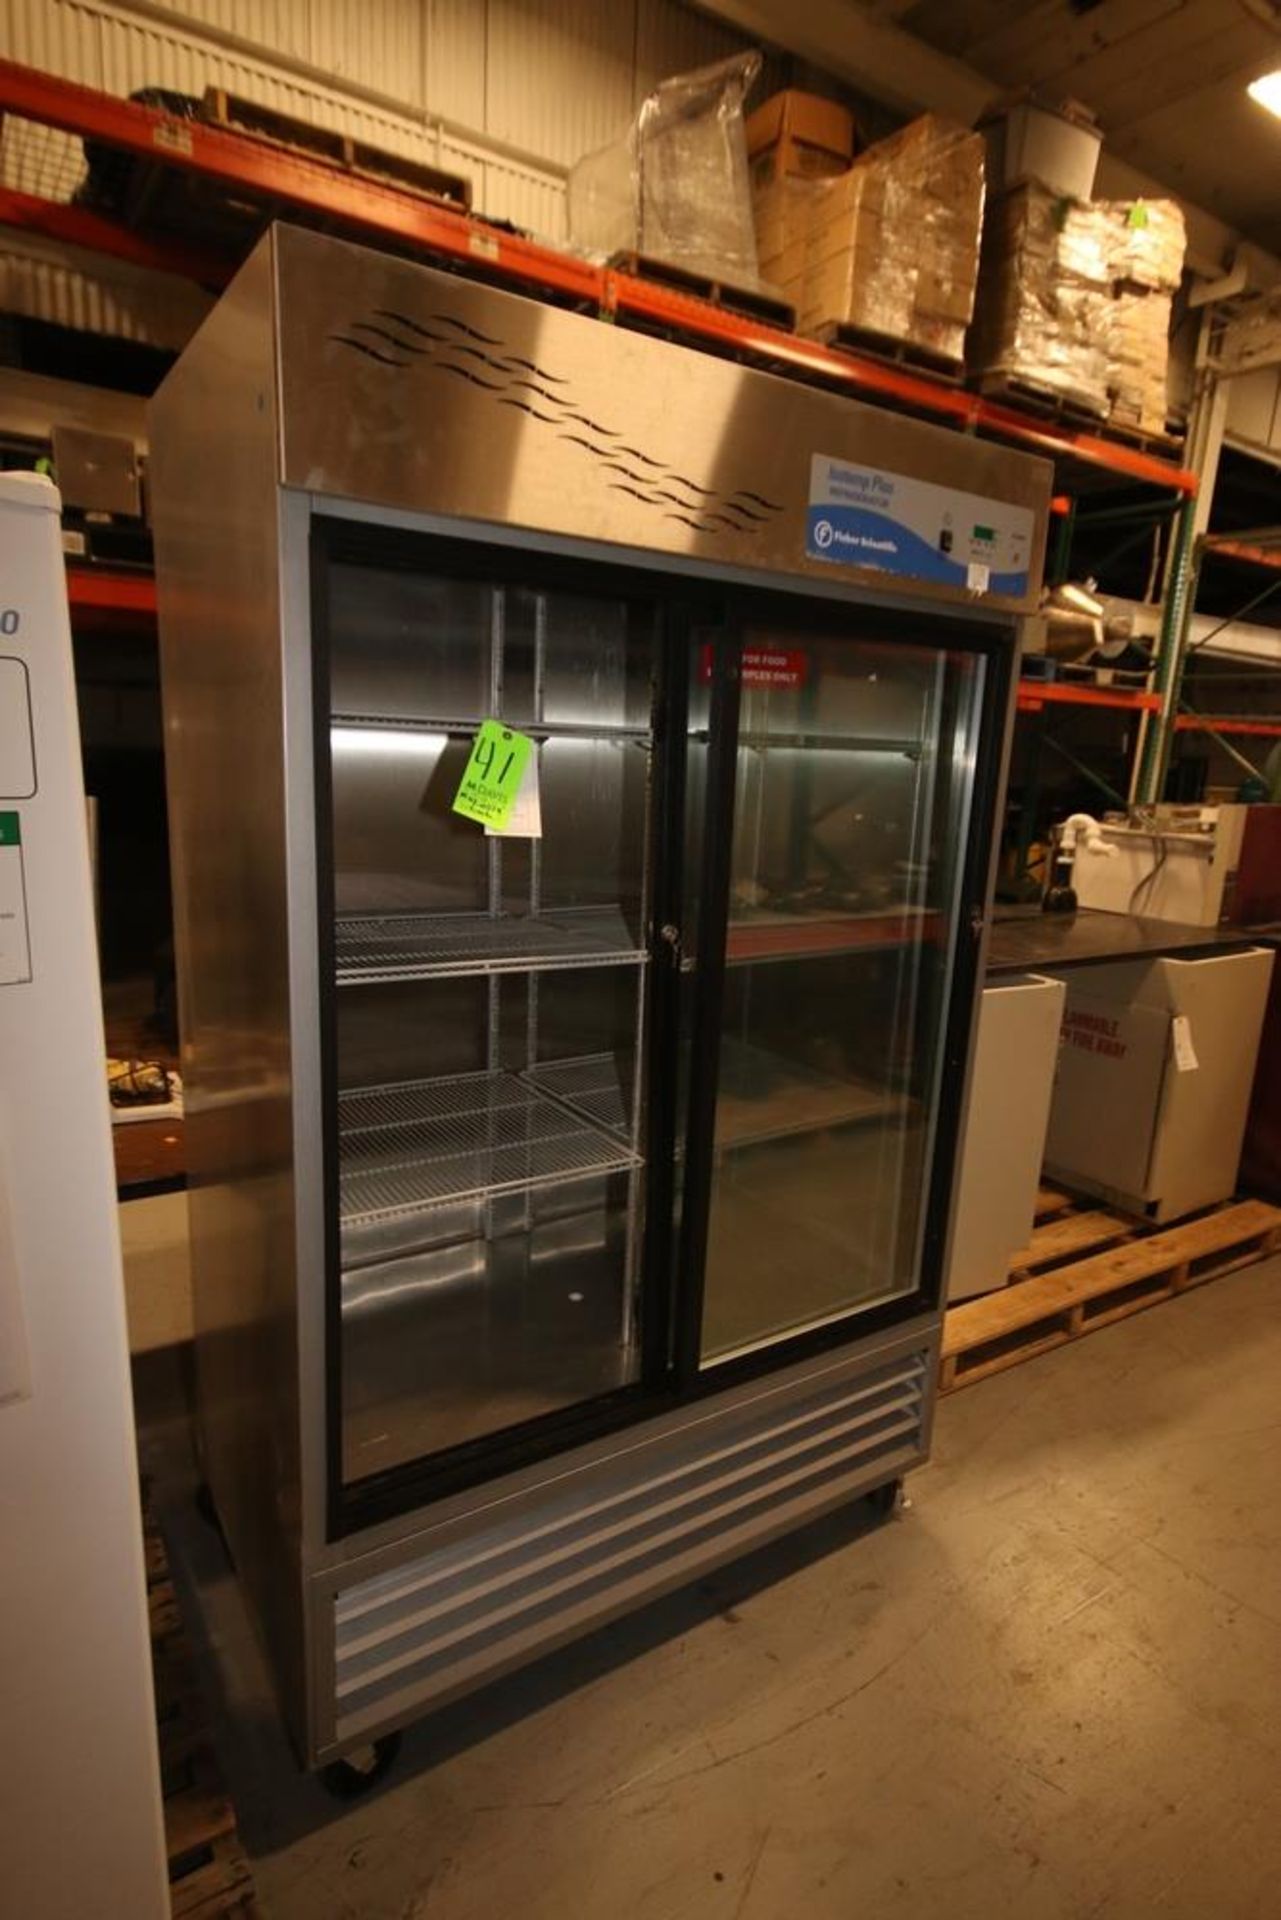 Fisher Scientific Isotemp Plus Refrigerator, Overall Dims.: 52" L x 30" W x 83" H, Mounted on - Image 2 of 3